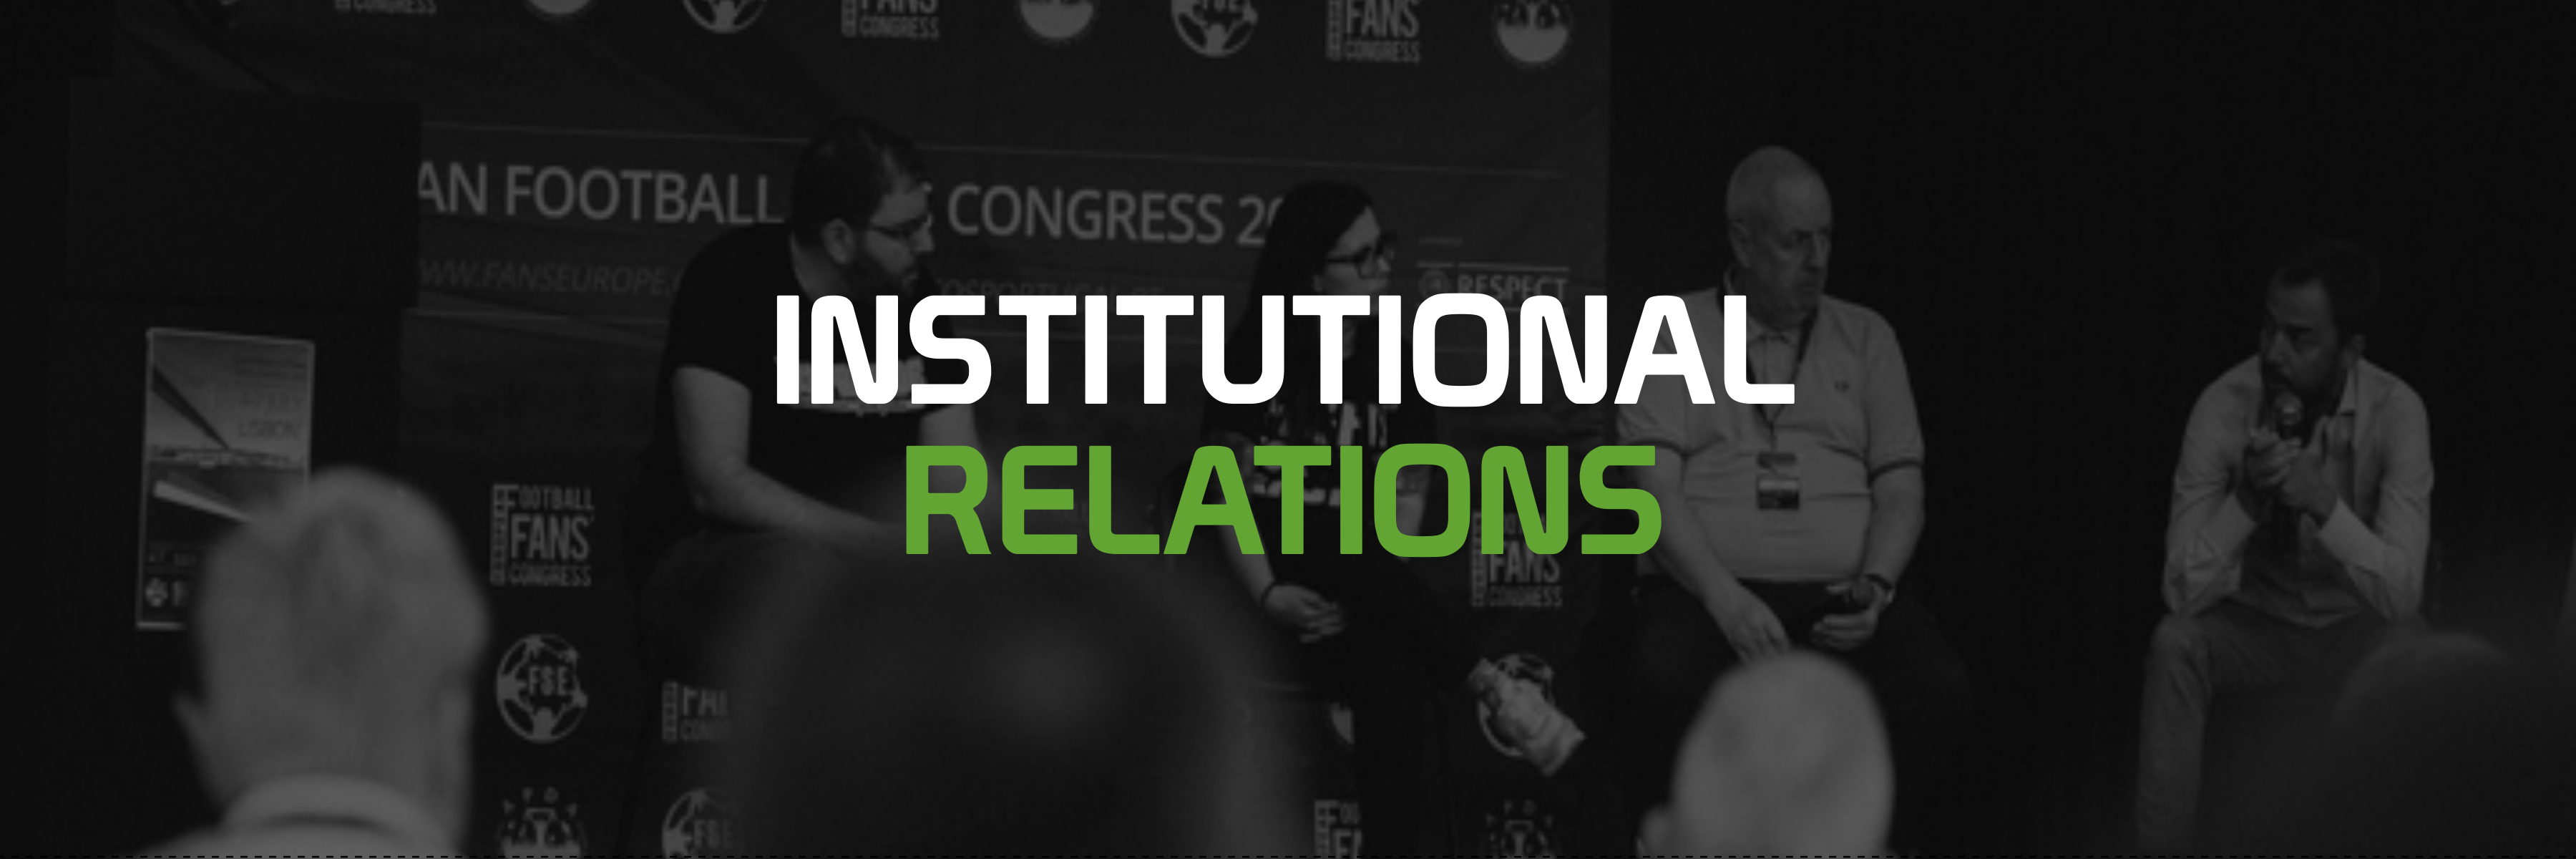 Institutional Relations Banner